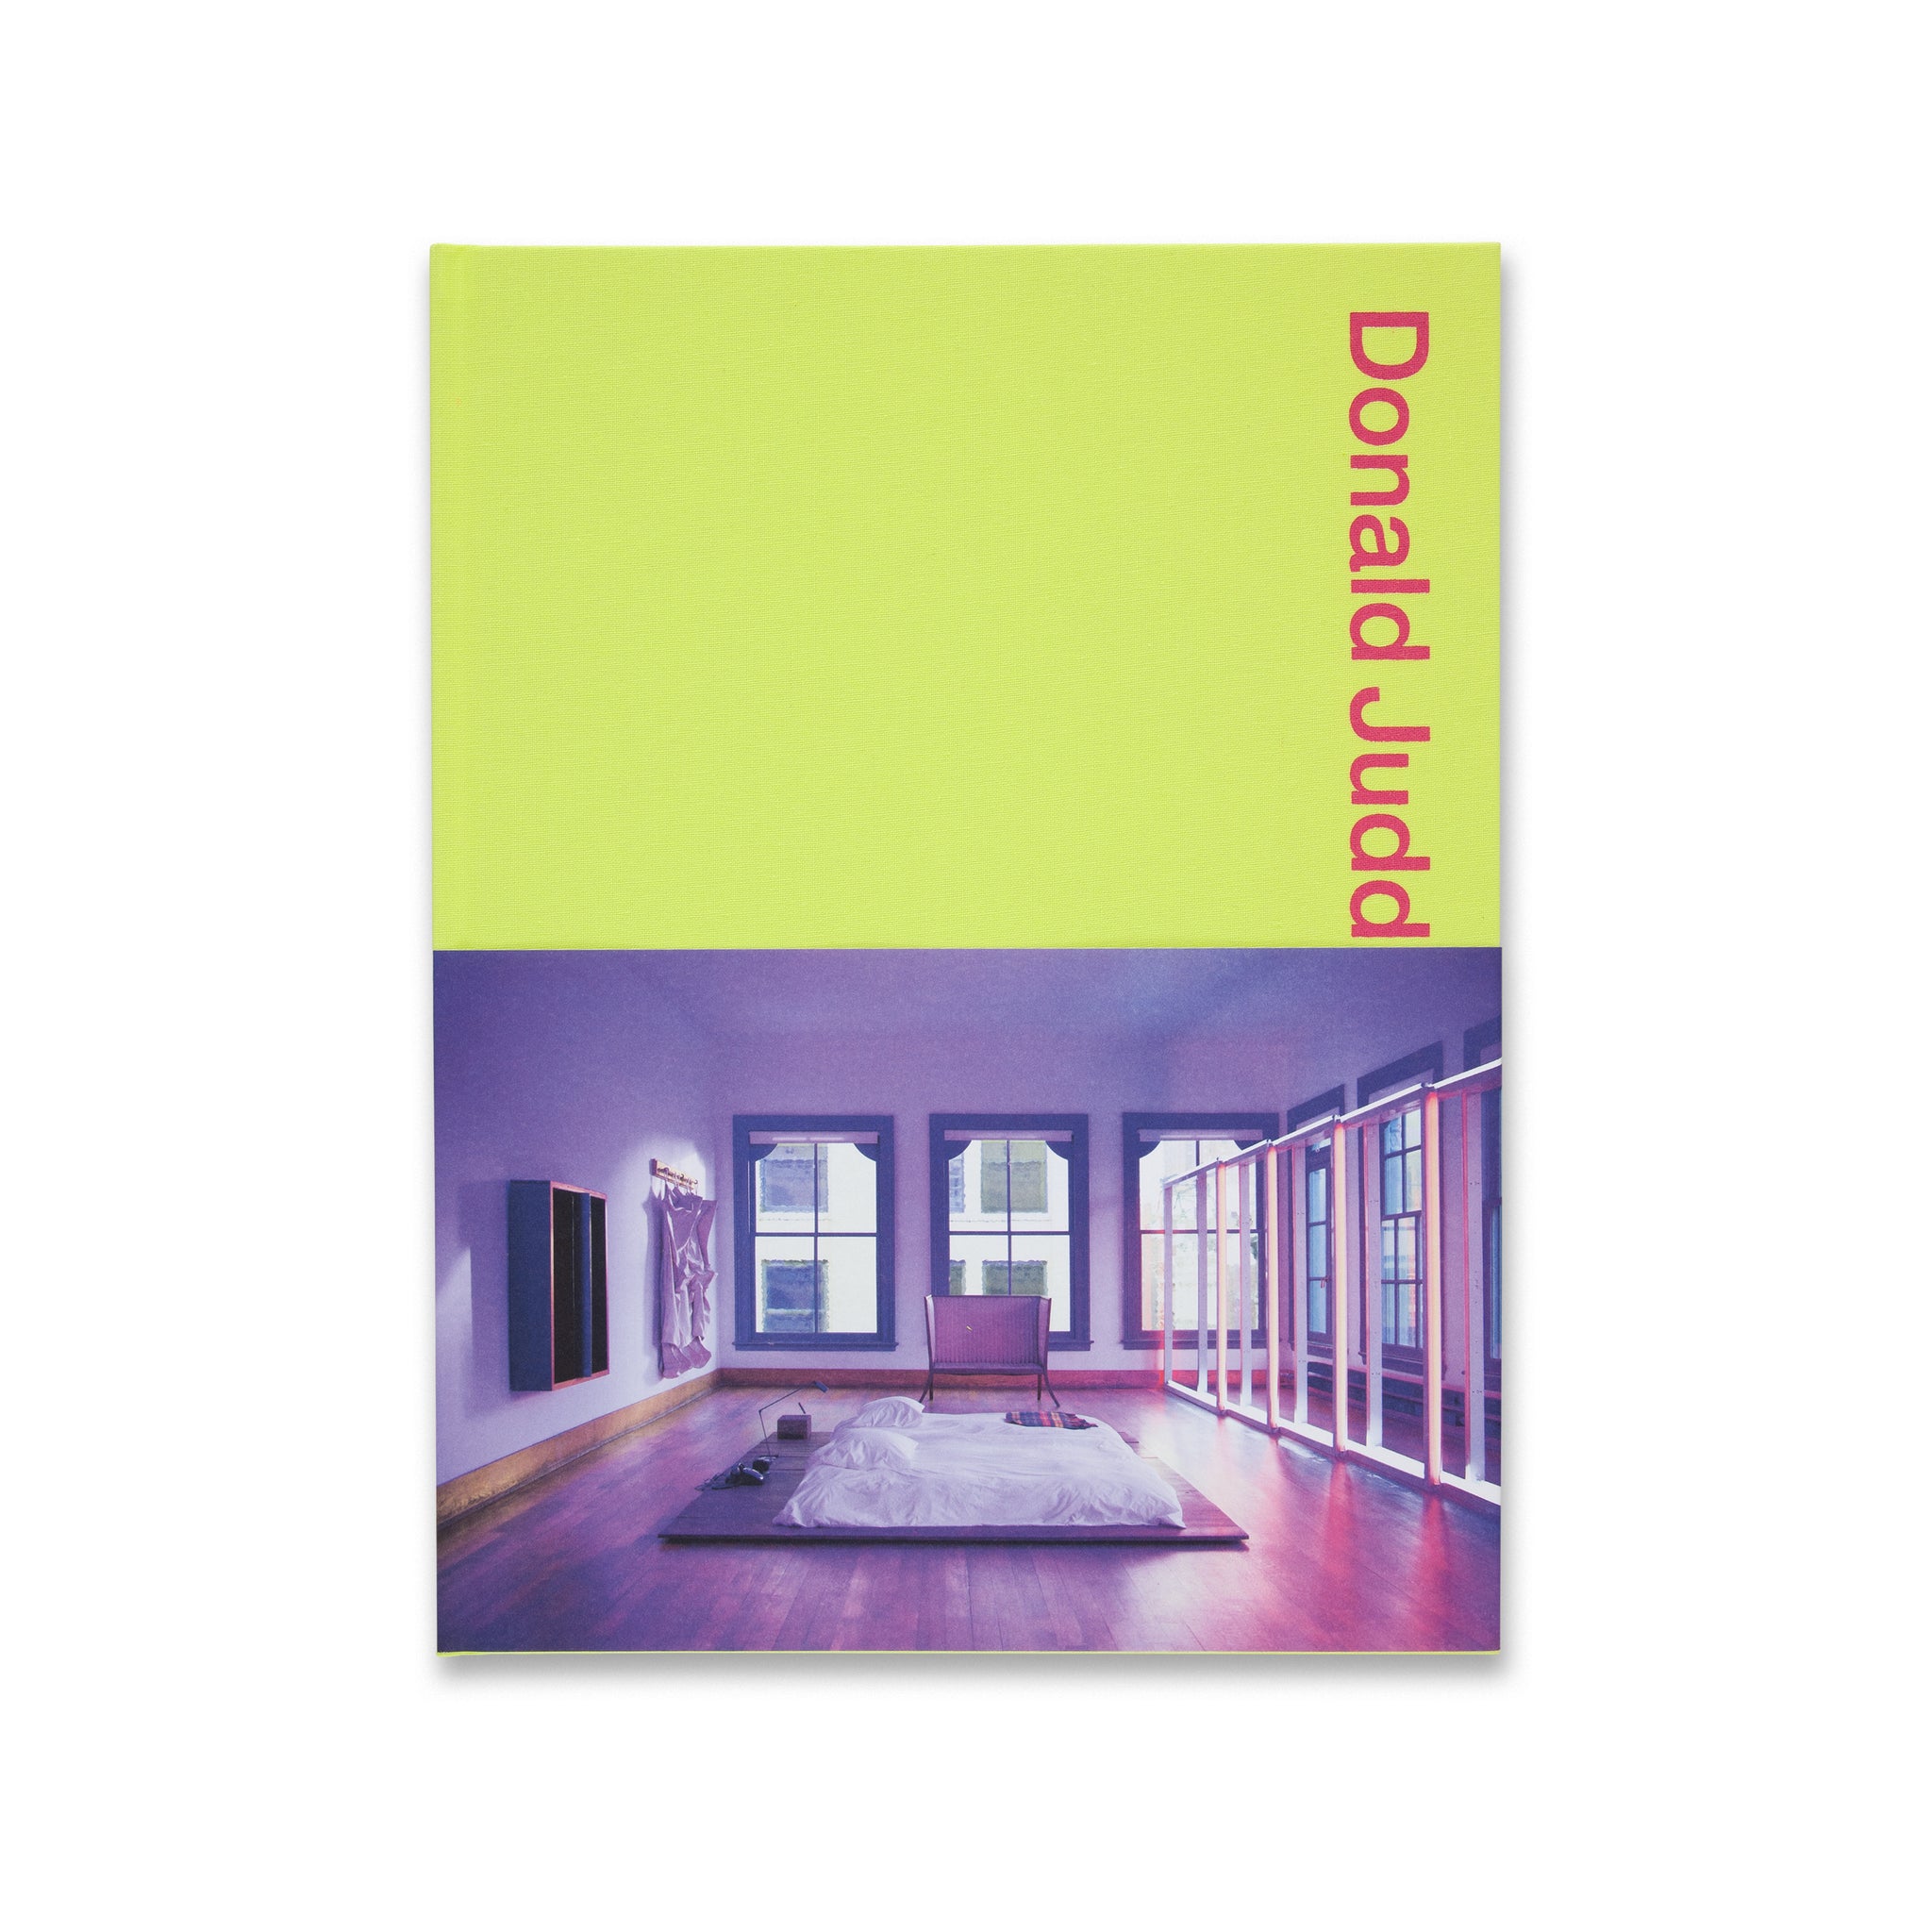 Front cover of the book Donald Judd Spaces with bellyband